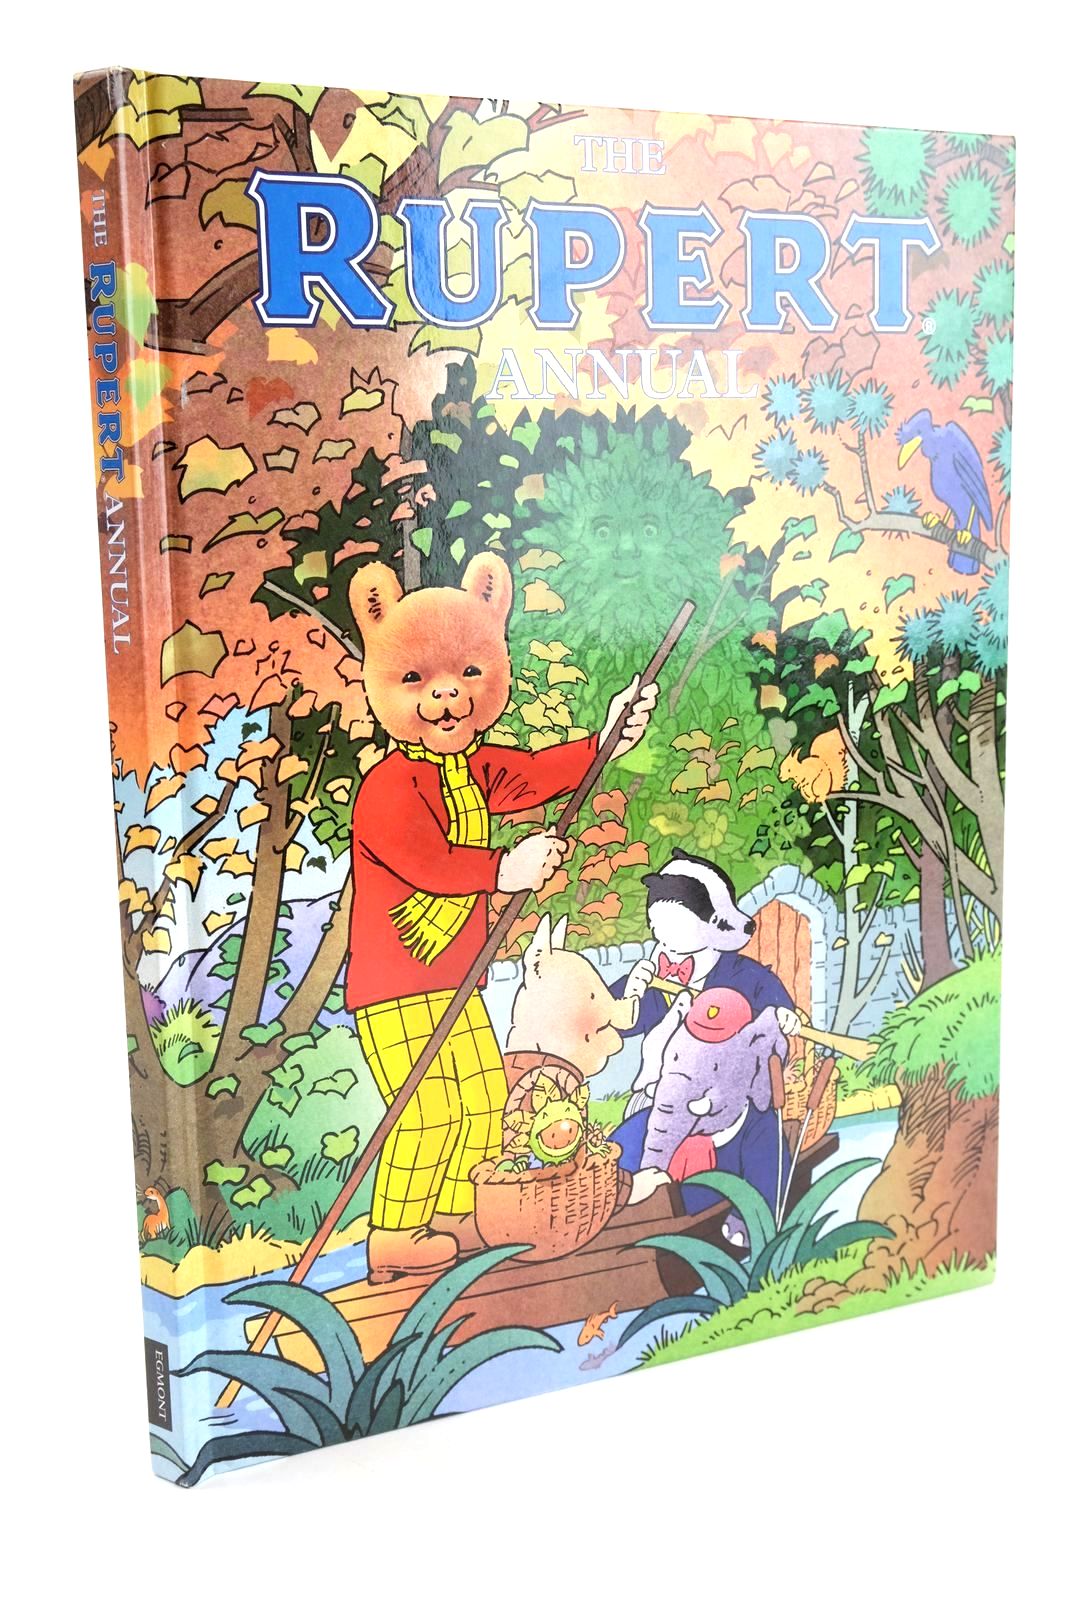 Photo of RUPERT ANNUAL 2016- Stock Number: 1323530